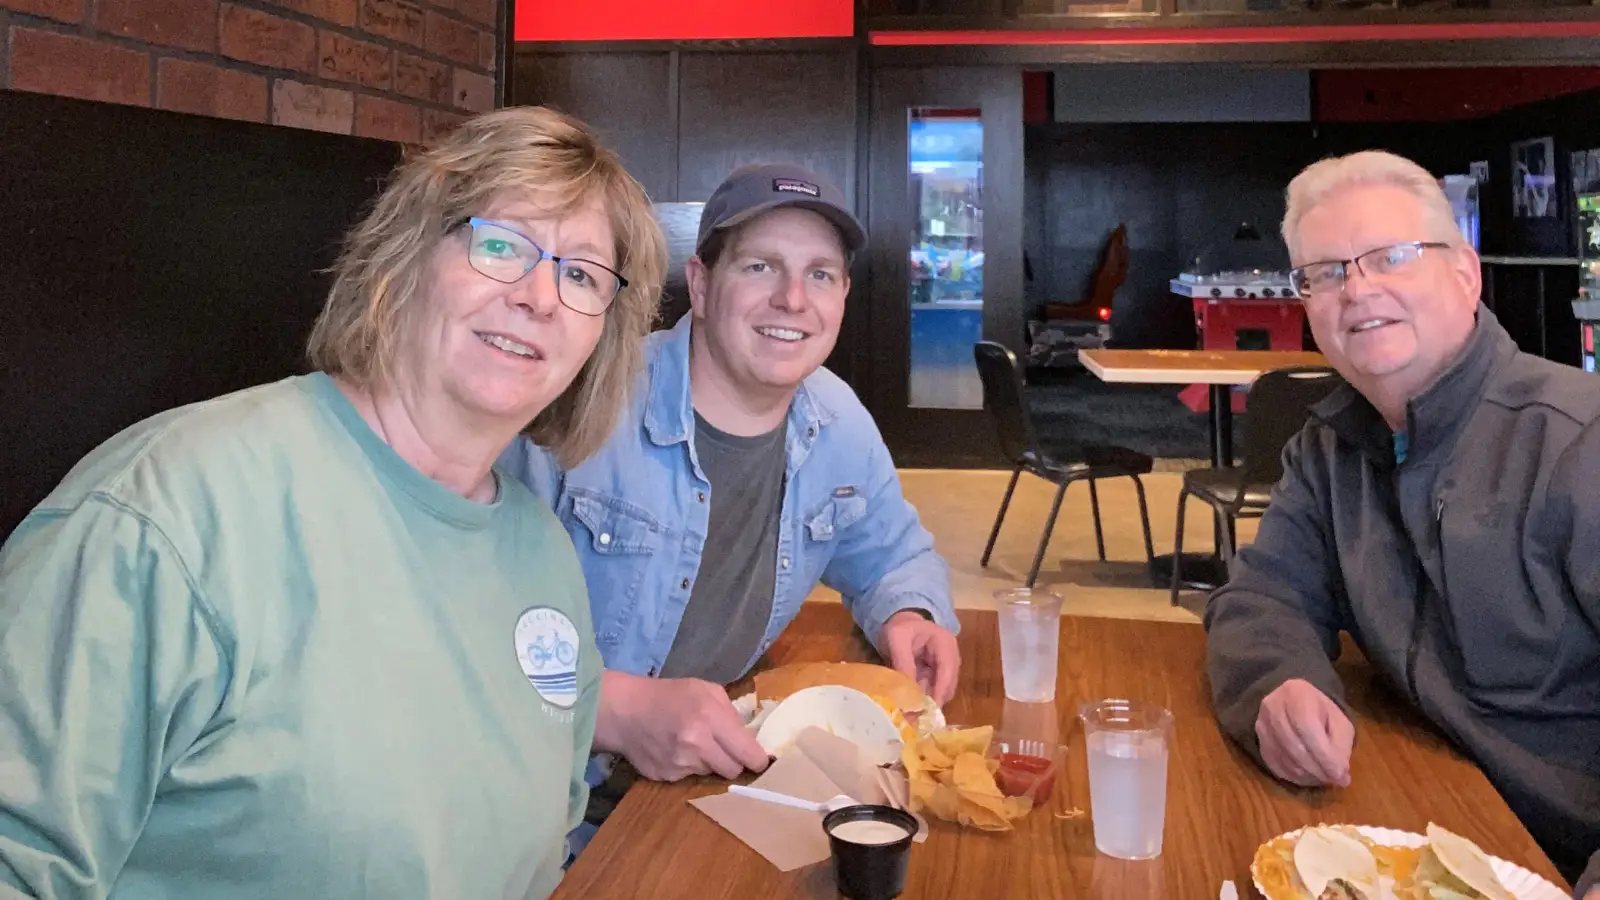 3 people sit at Grand Forks Red Pepper with Food smiling at the camera